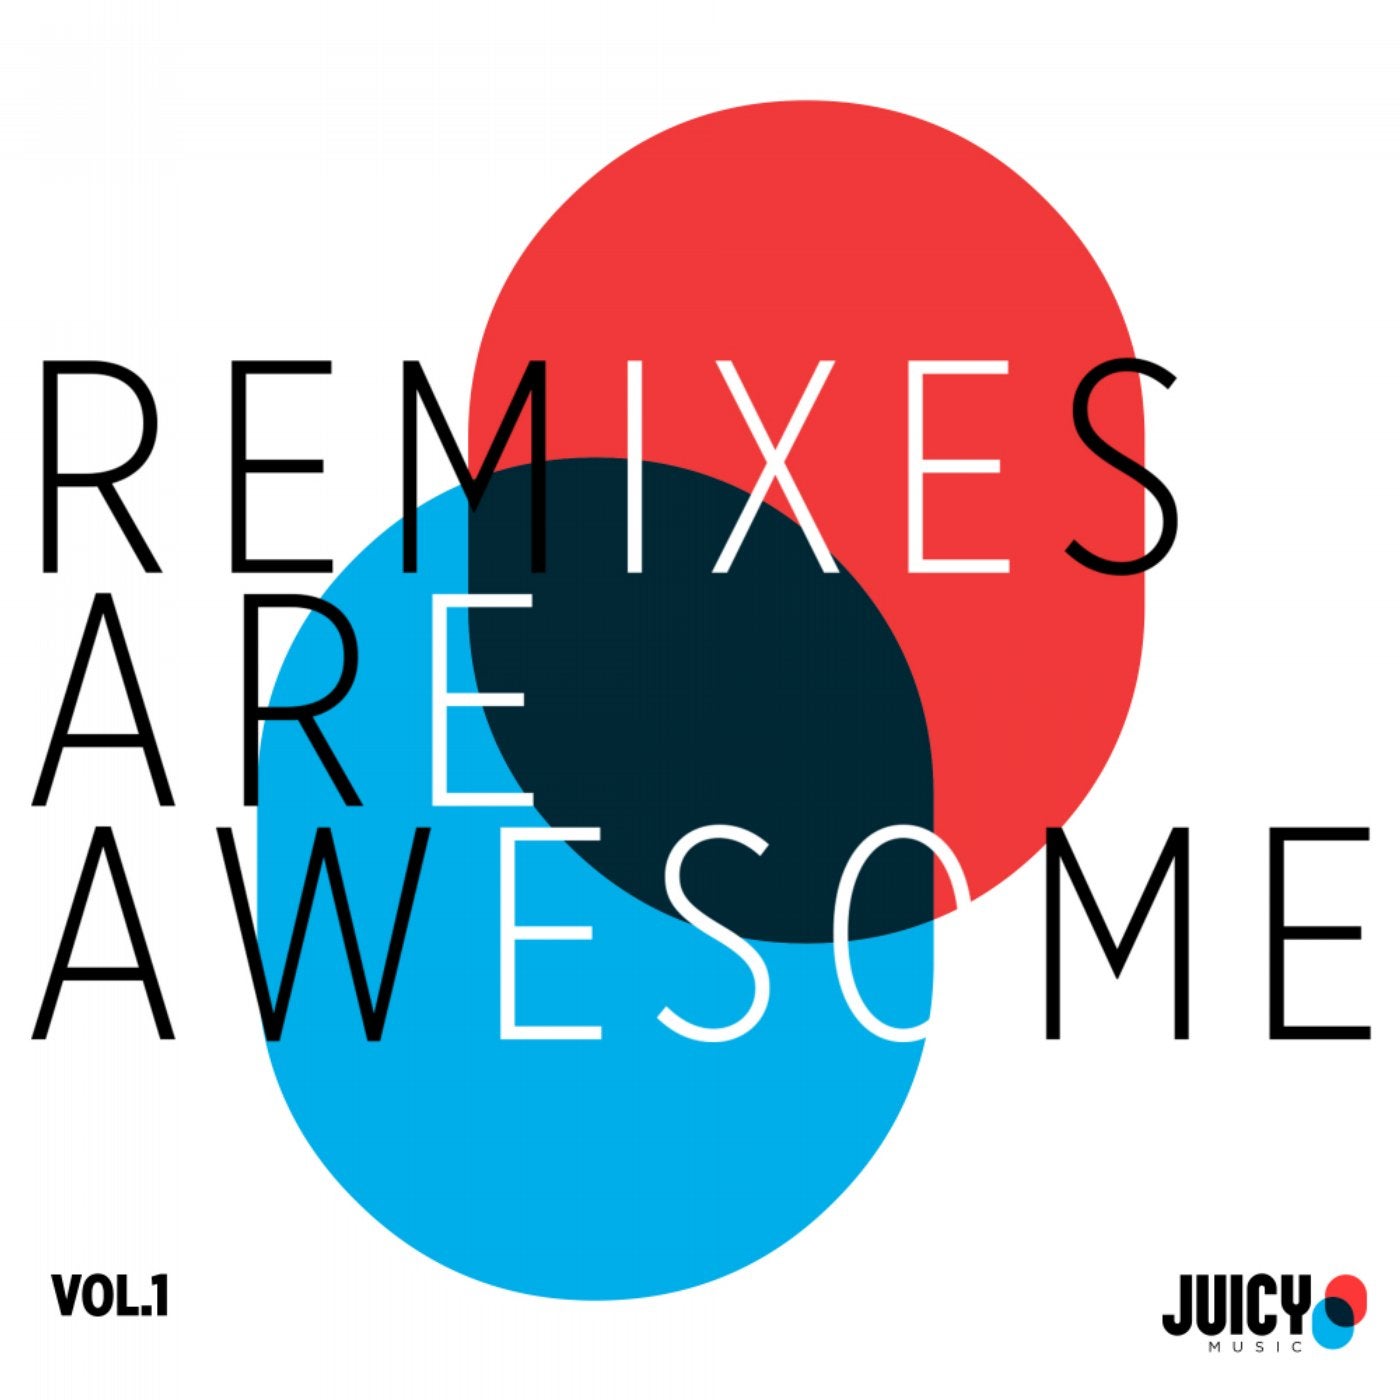 Remixes are Awesome